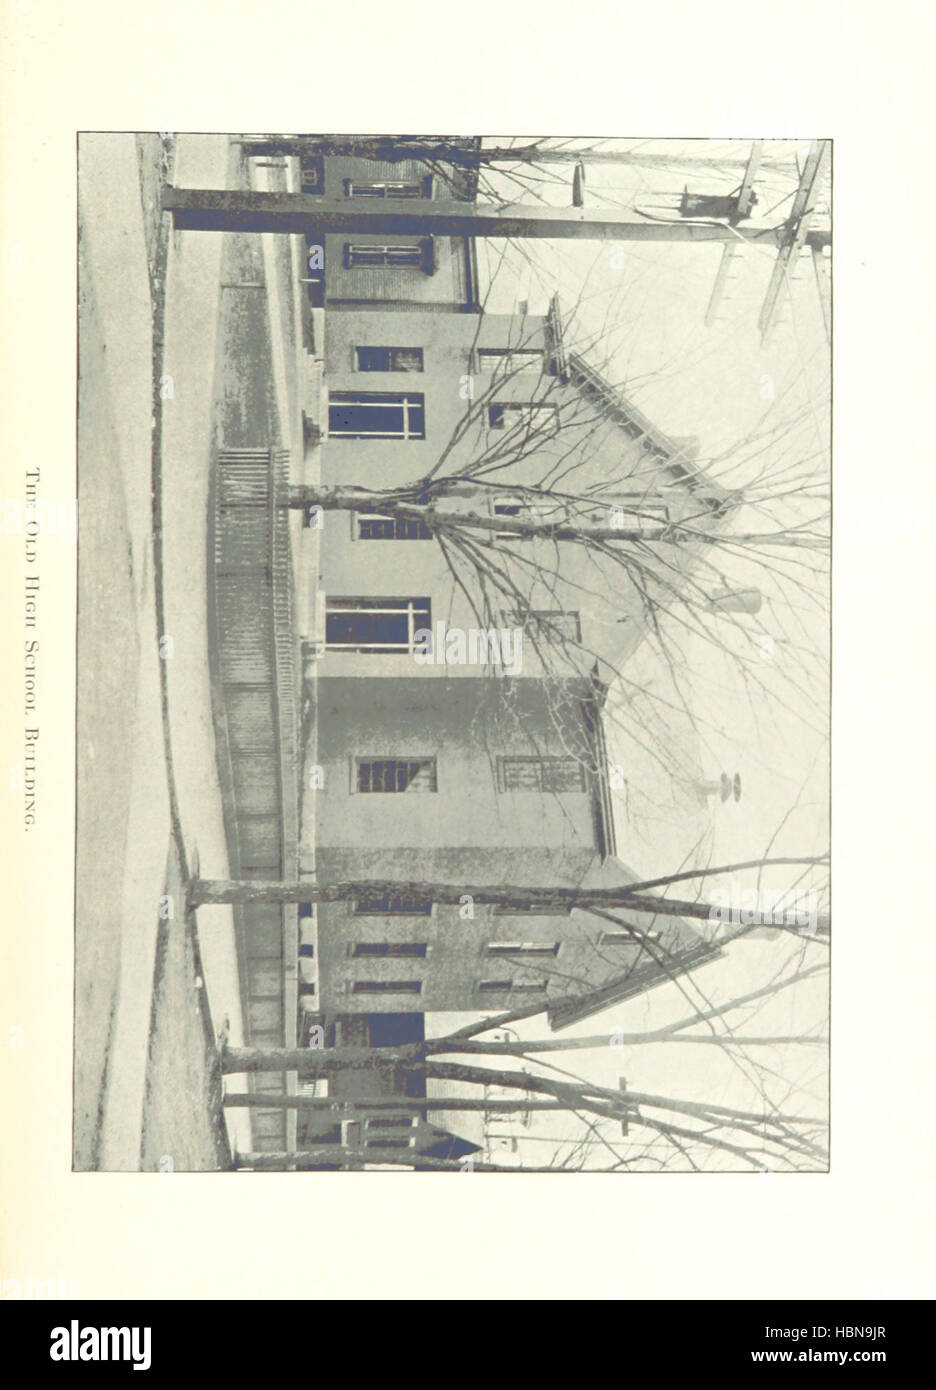 Image taken from page 351 of 'History of the Origin of the Town of Clinton, Massachusetts, 1653-1865' Image taken from page 351 of 'History of the Origin Stock Photo